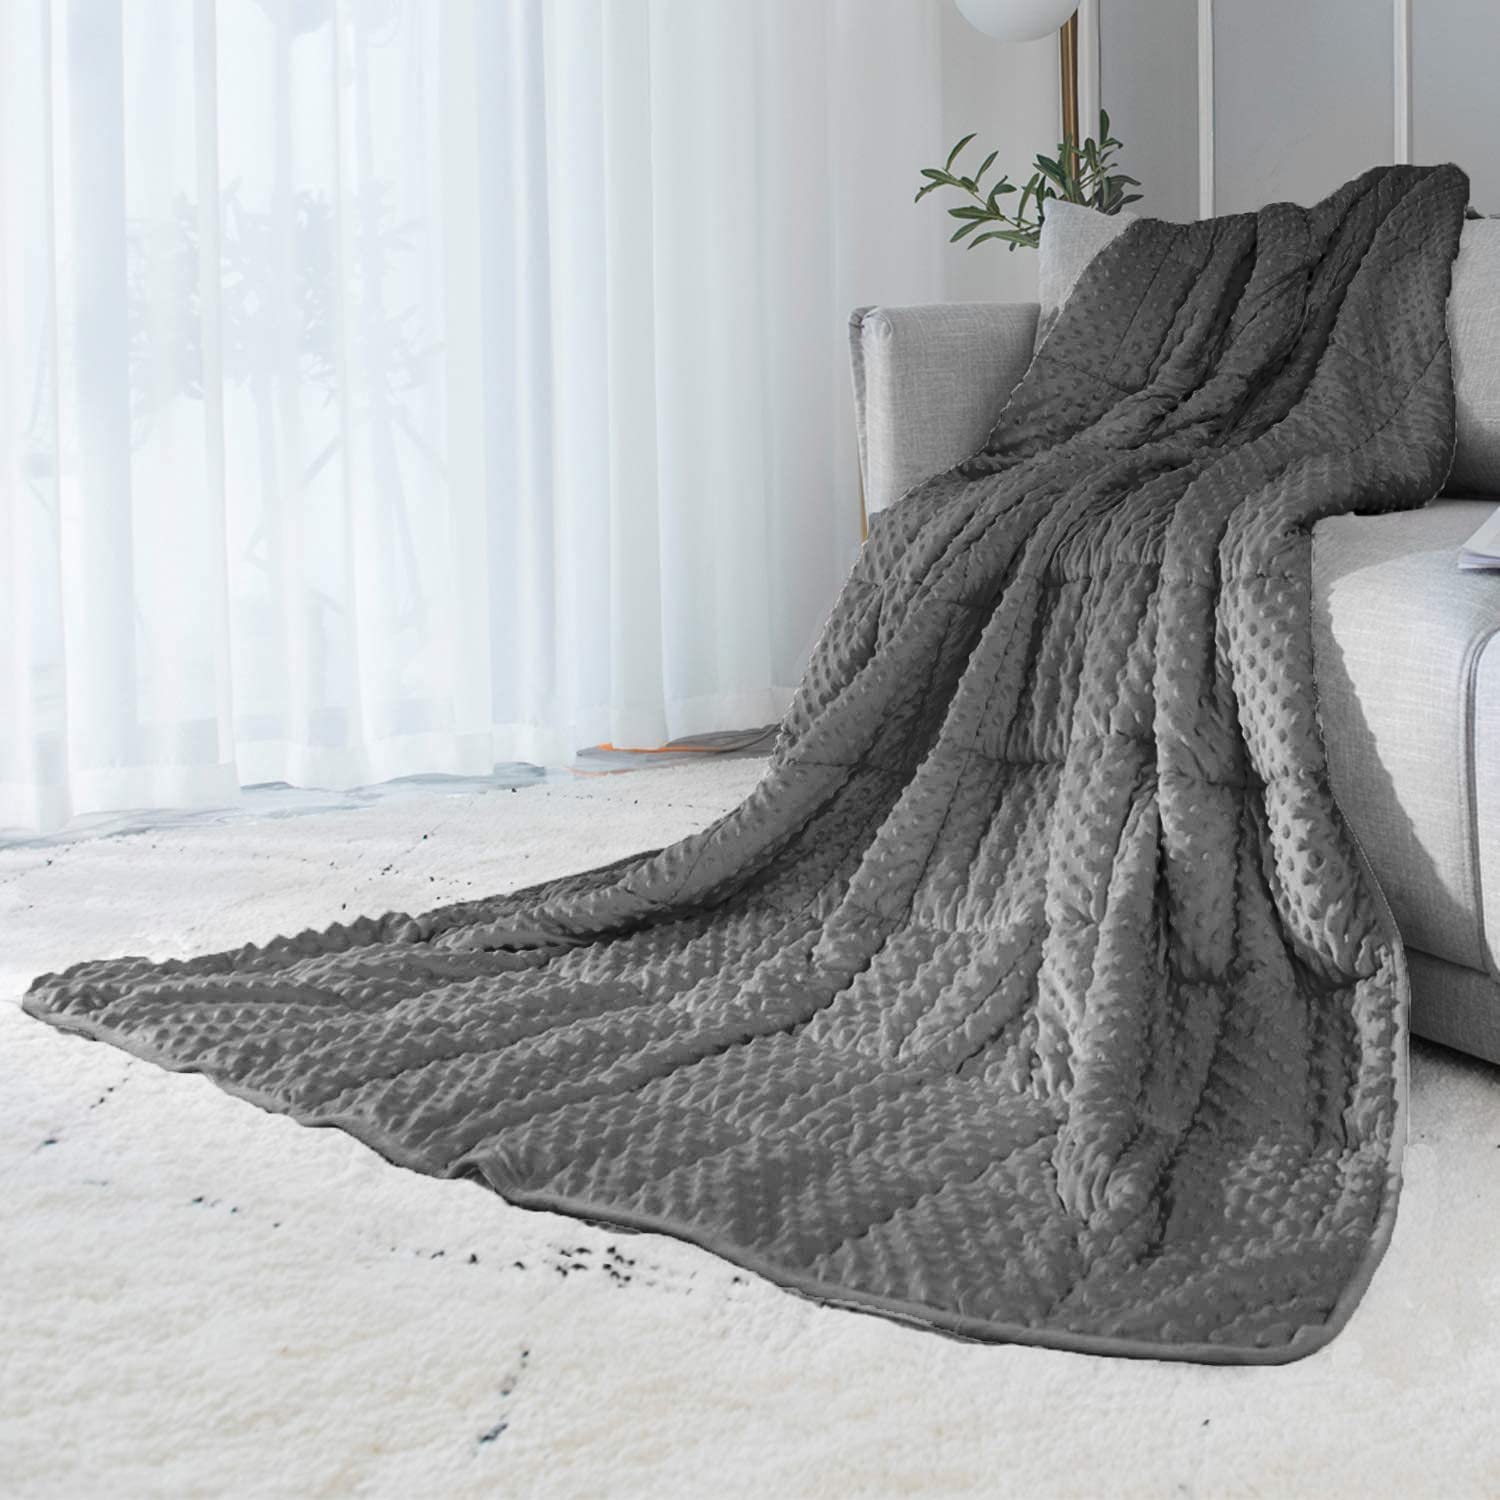 ALANSMA Reversible Weighted Blanket for All Season